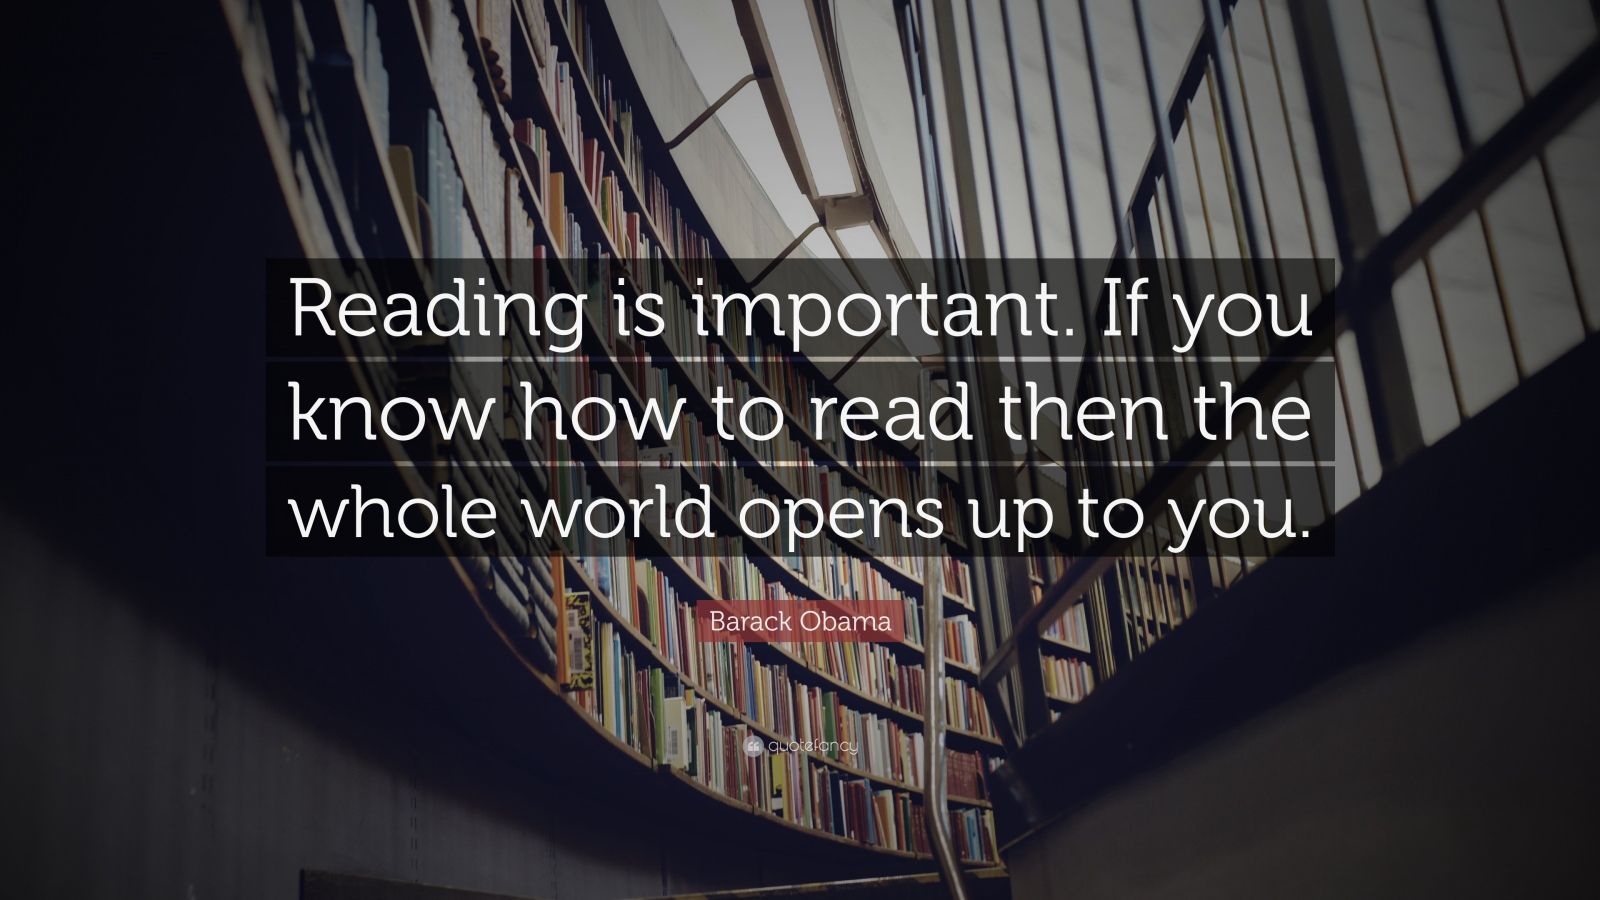 Barack Obama Quote: “Reading is important. If you know how to read then ...